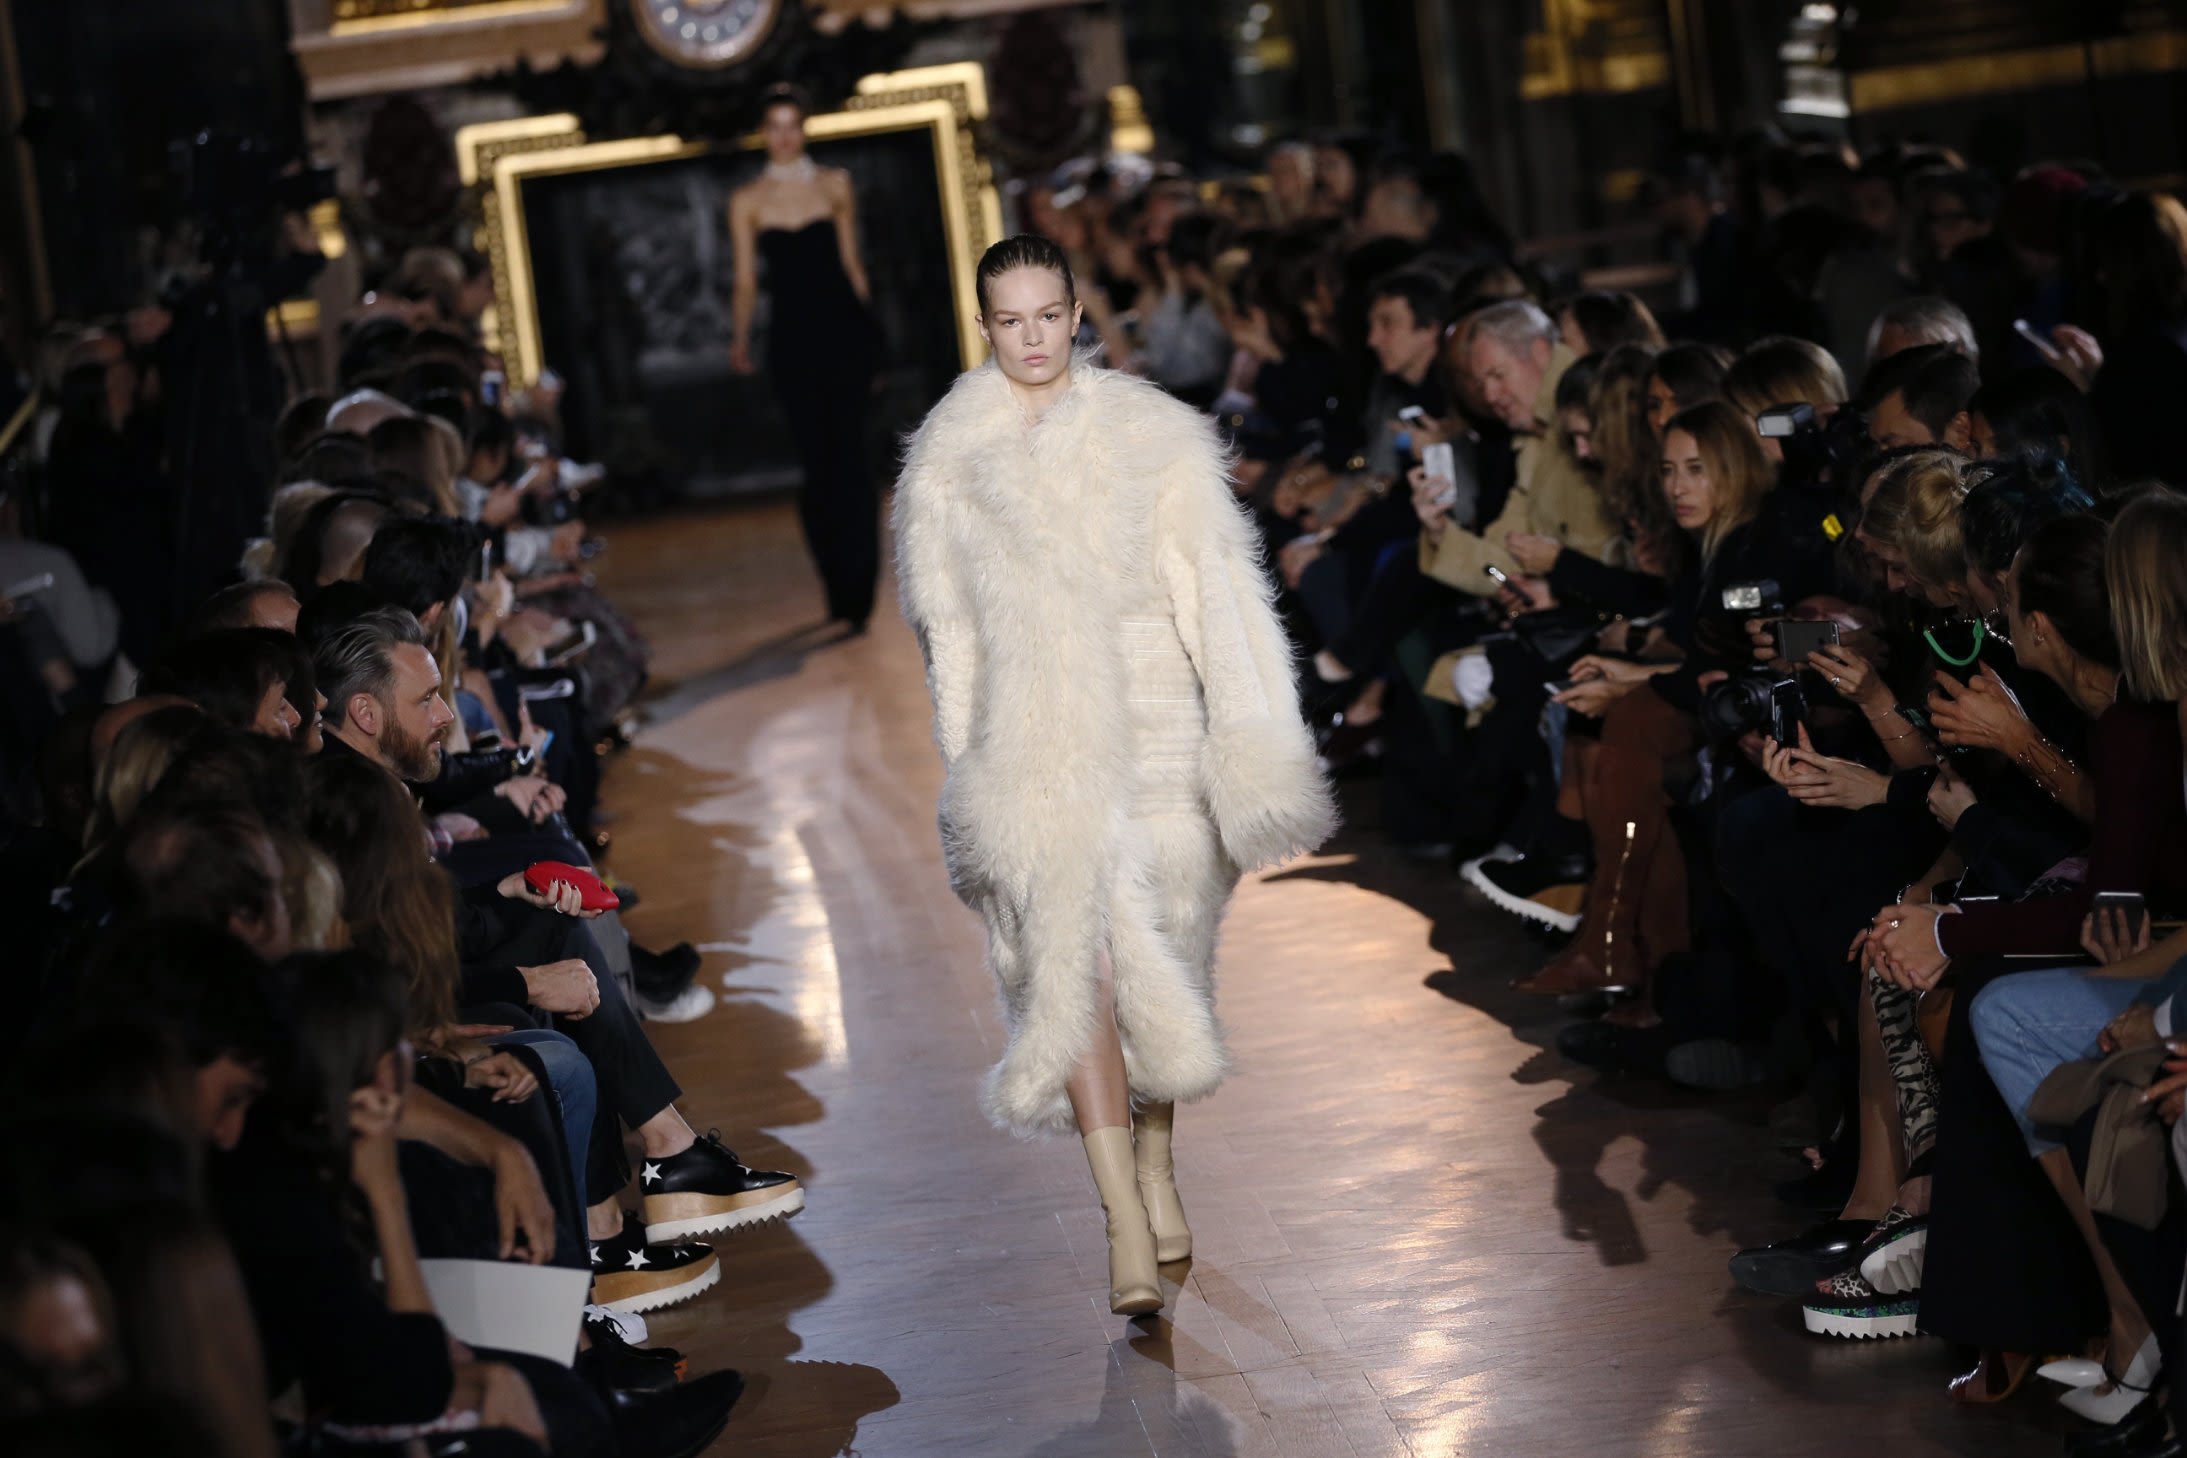 Gucci Is Going Fur-Free - Gucci Bans The Use Of Animal Fur